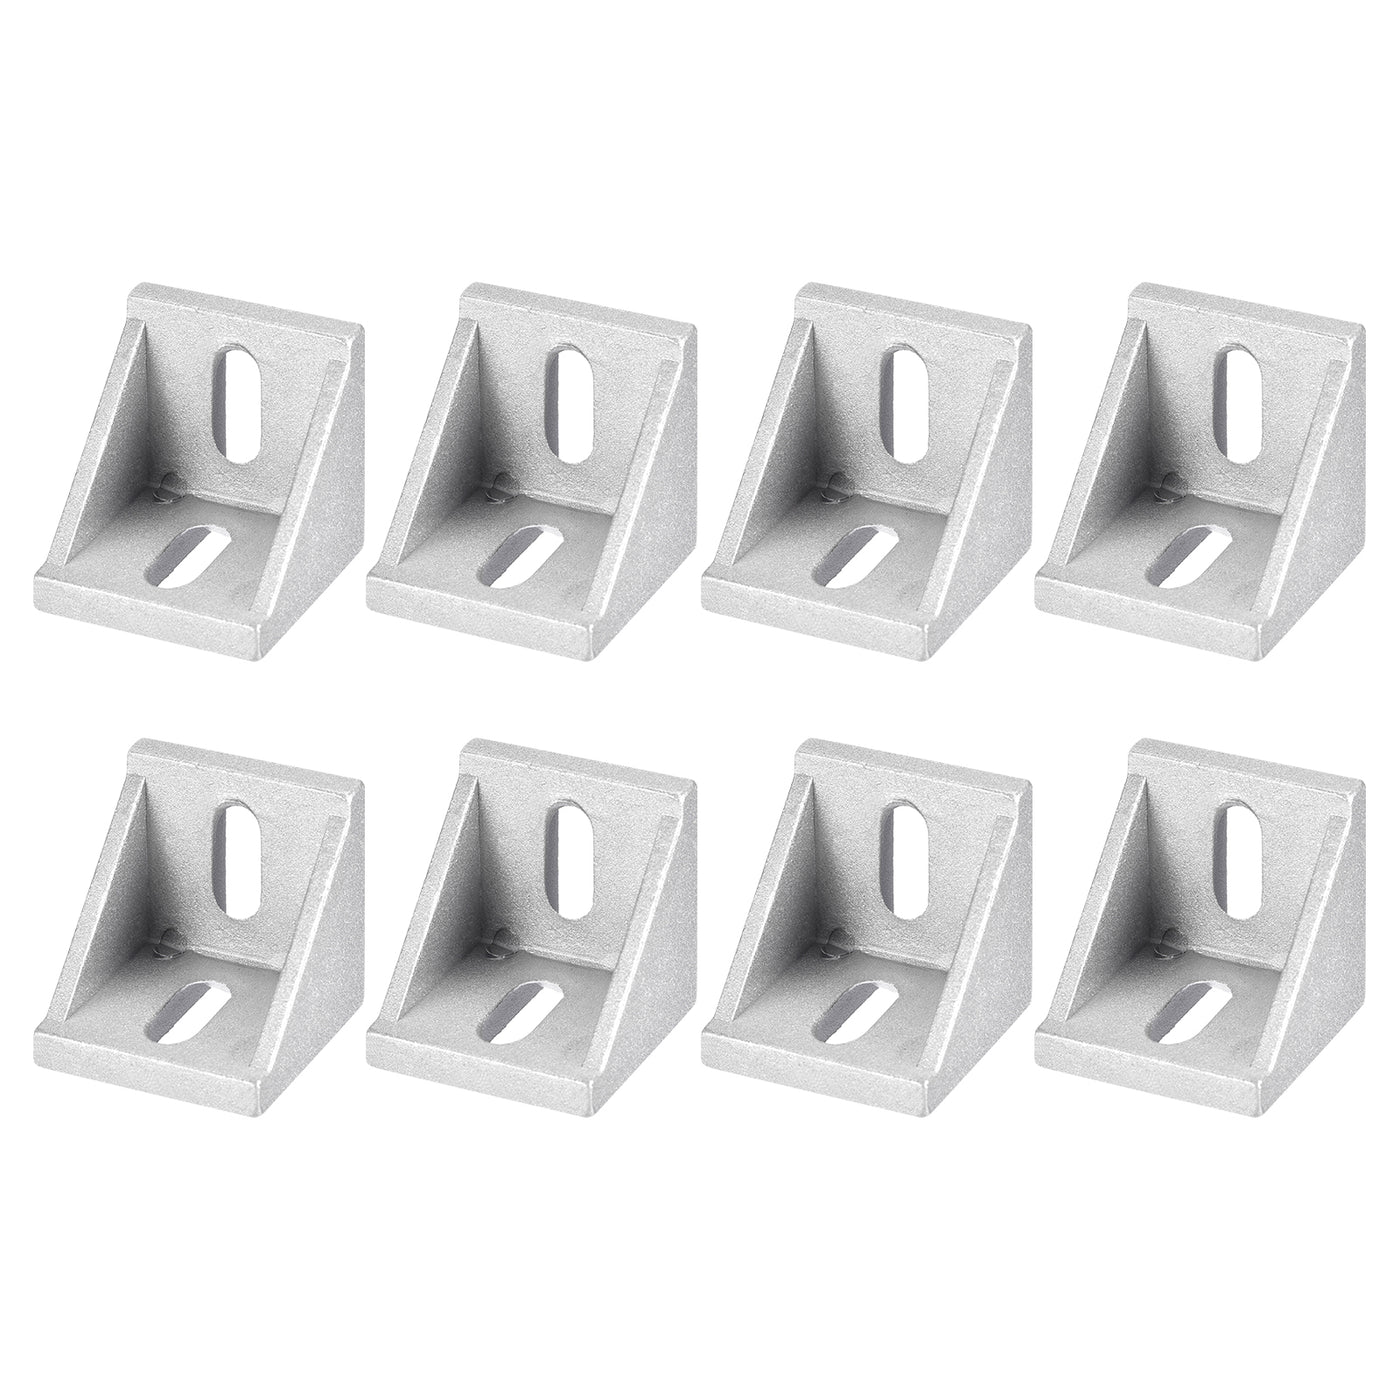 uxcell Uxcell 8Pcs Inside Corner Bracket Gusset, 42x42x41mm 4545 Angle Connectors for 4545/5050 Series Aluminum Extrusion Profile Silver